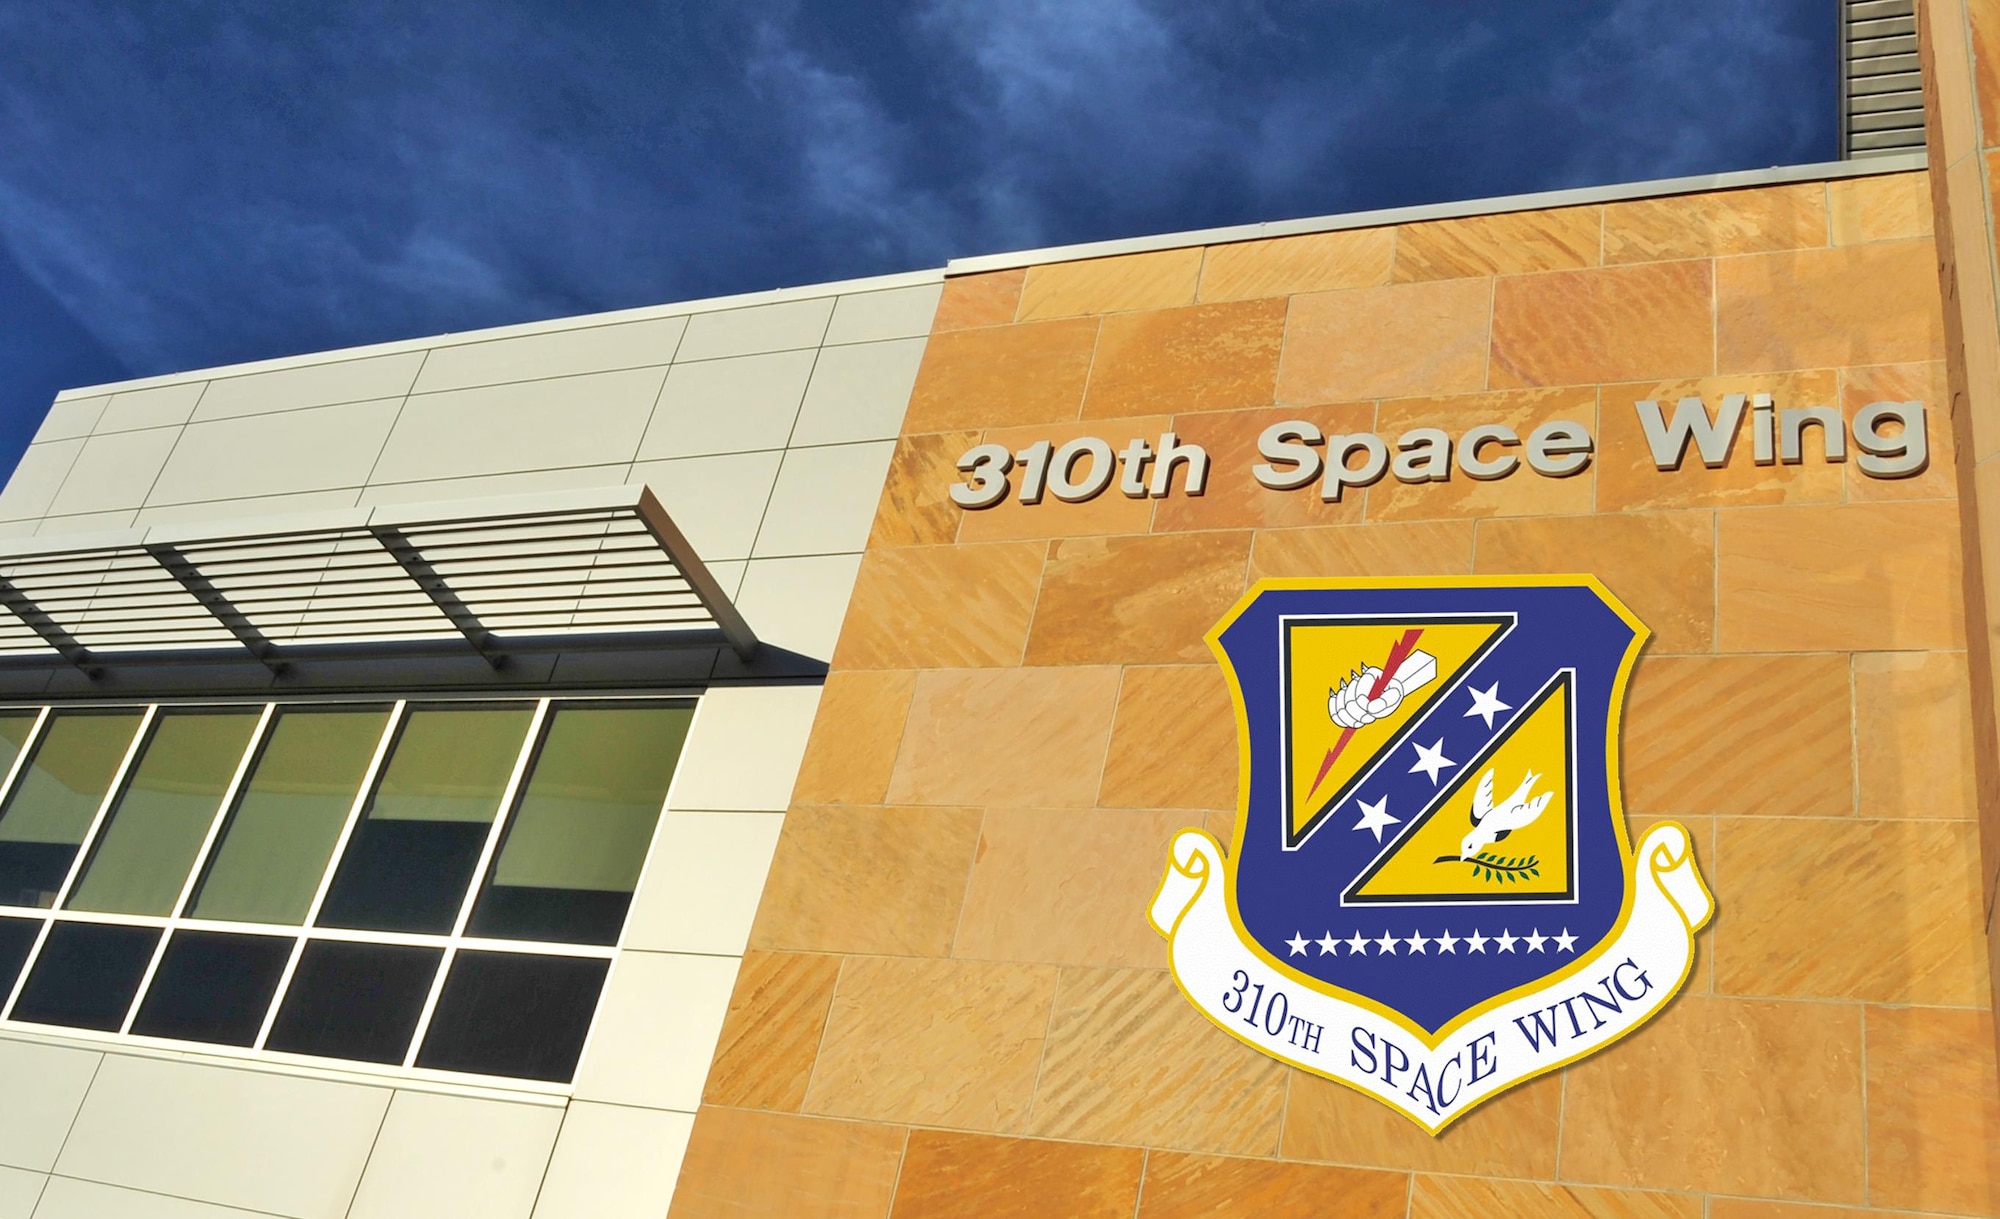 The 310th Space Wing headquarters building resides at Schriever AFB, Colorado, with geographically separated units at Peterson and Buckley AFB, Colorado, and Vandenberg AFB, Cali.